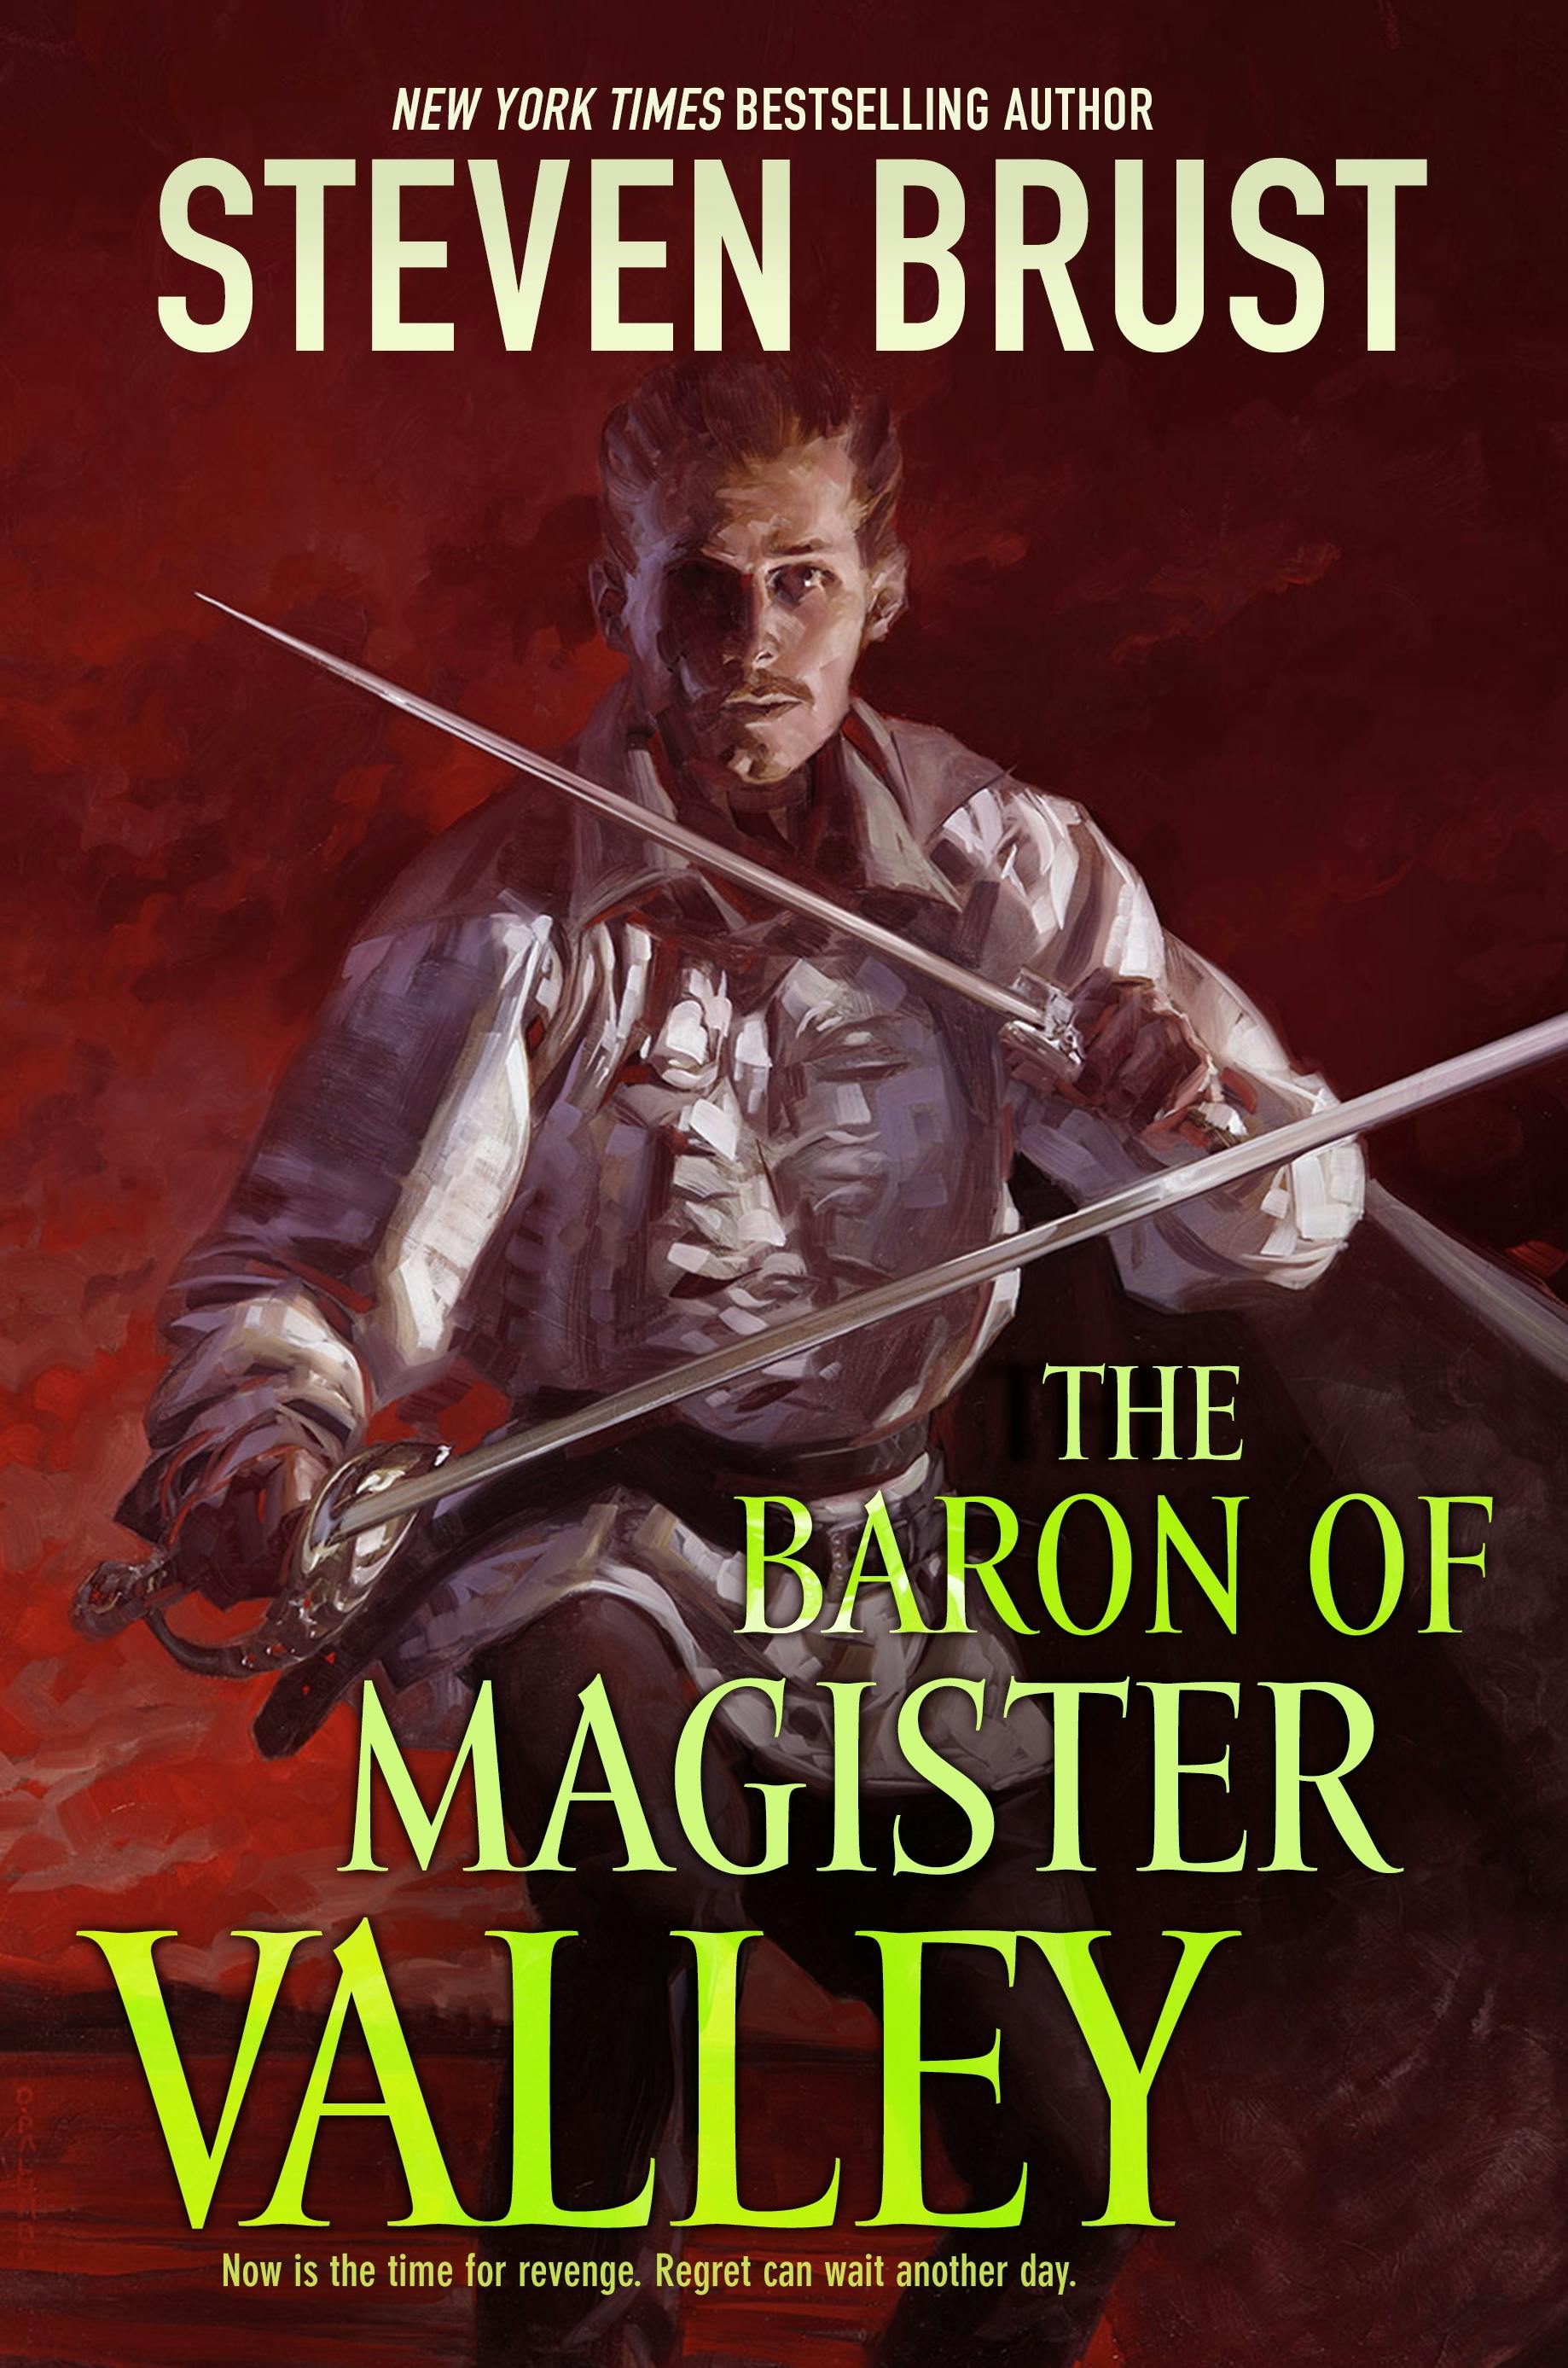 Cover for the book titled as: The Baron of Magister Valley